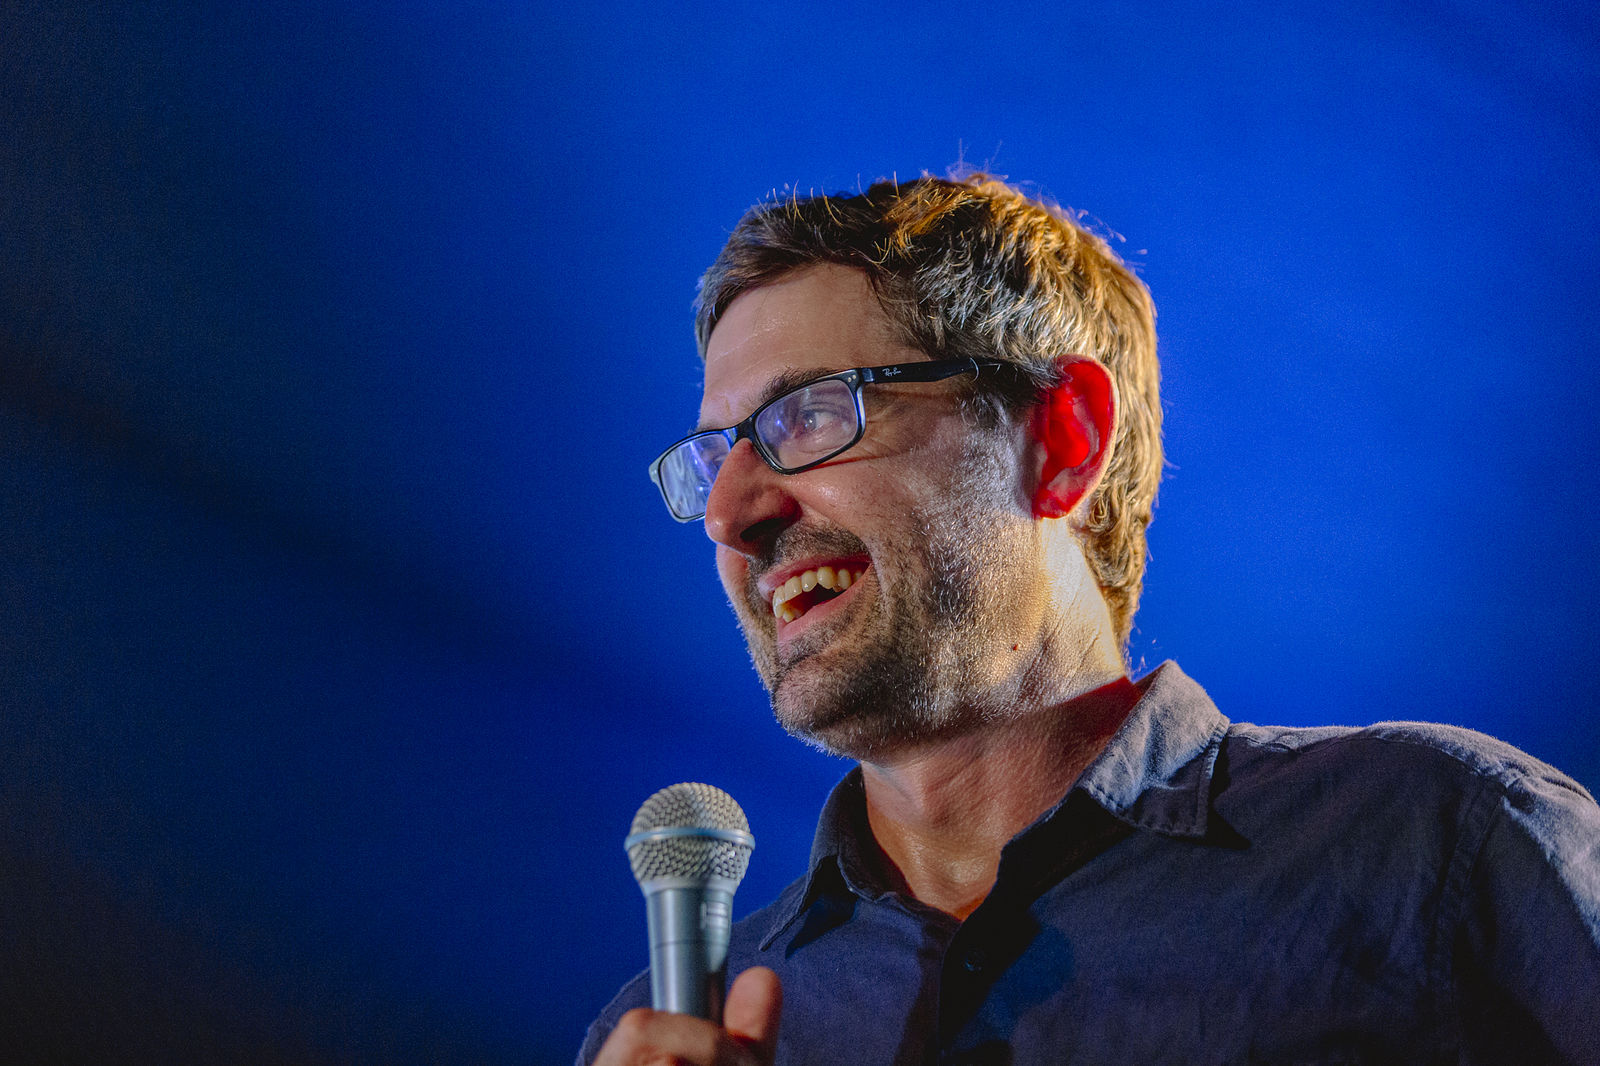 Adam Buxton in conversation with Louis Theroux